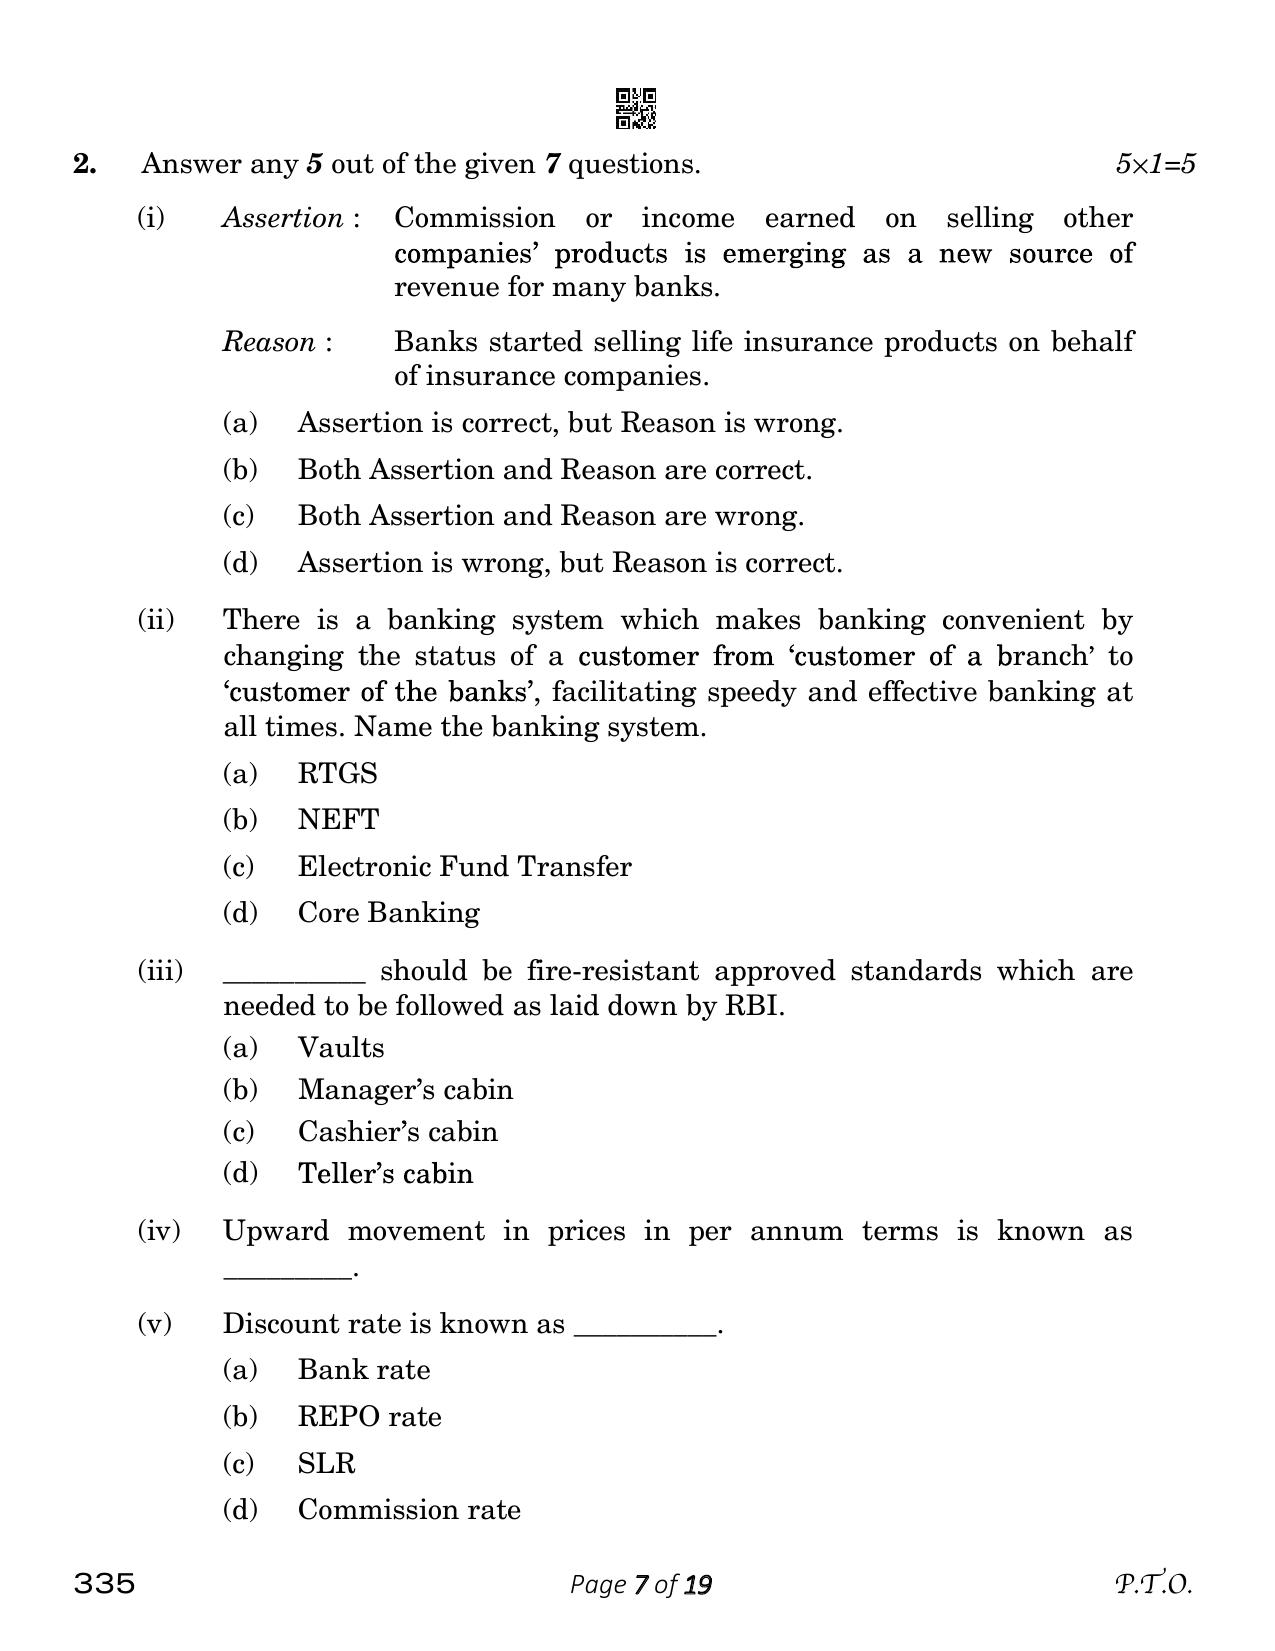 CBSE Class 12 Banking (Compartment) 2023 Question Paper - Page 7